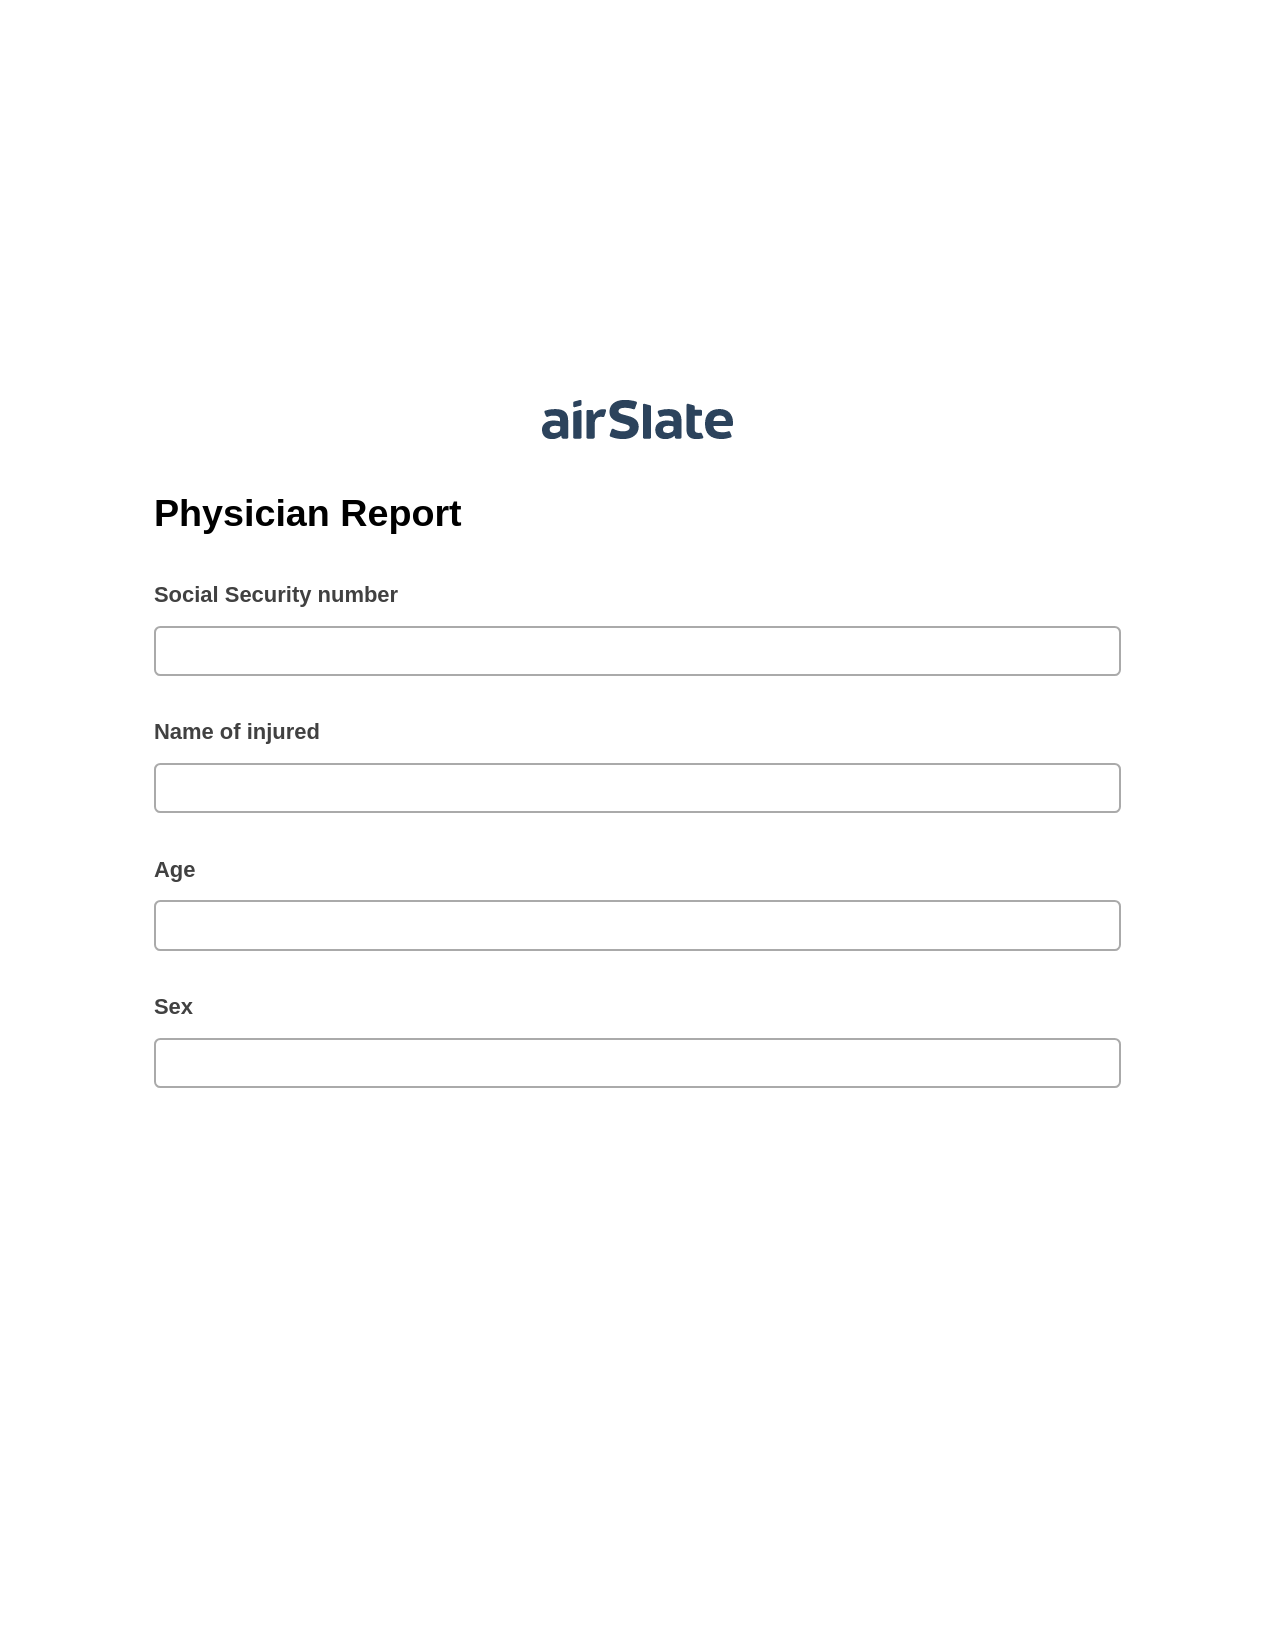 Physician Report Prefill from NetSuite records, Send Mailchimp Campaign Bot, Archive to Dropbox Bot